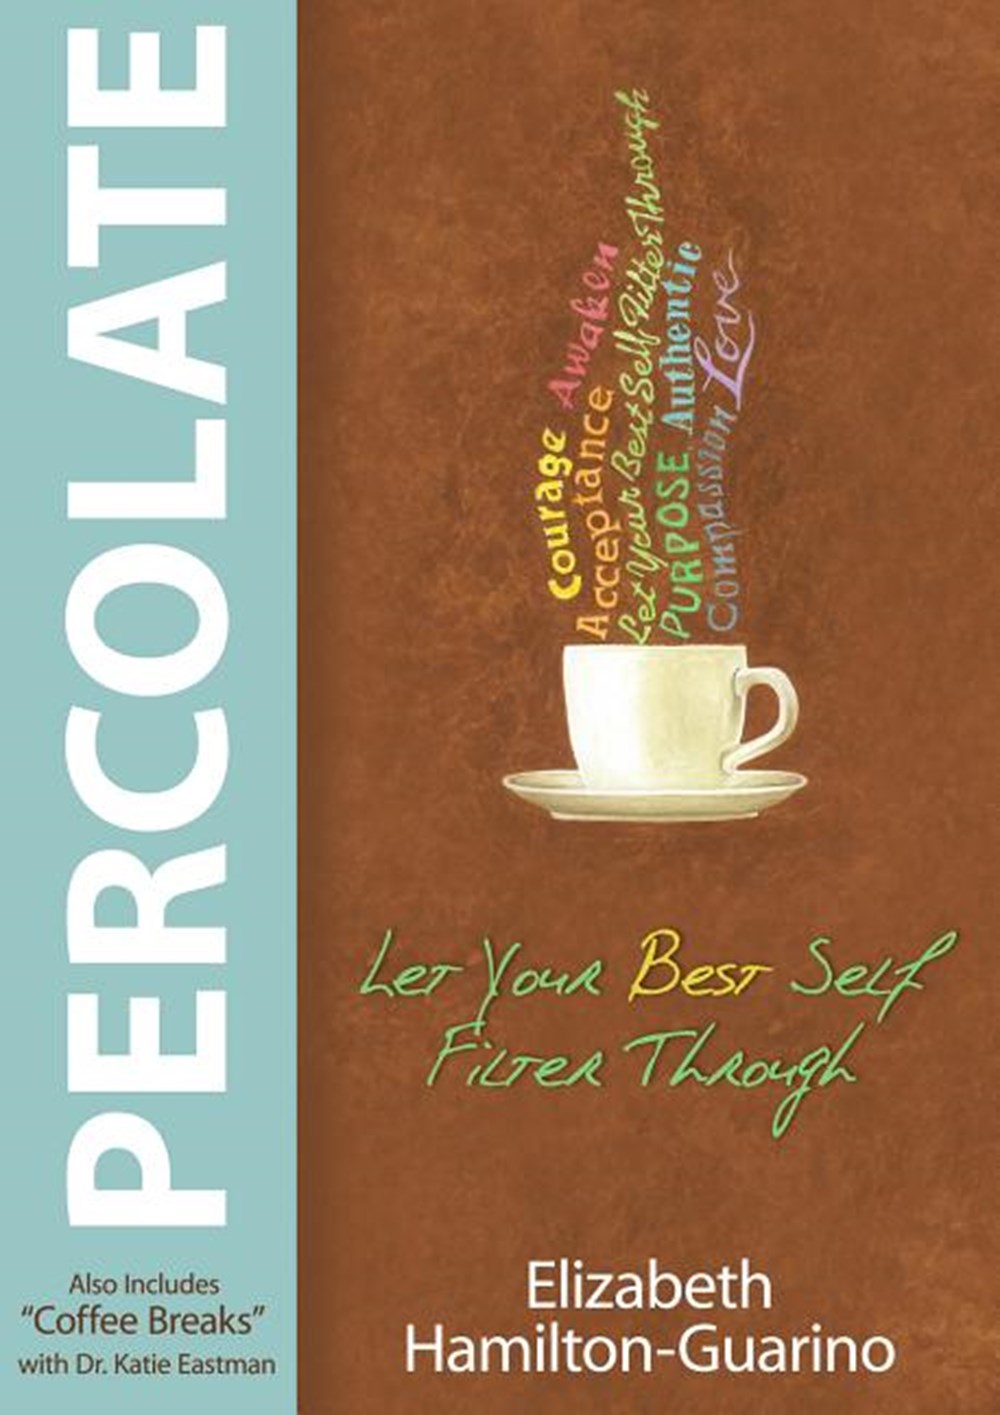 Percolate: Let Your Best Self Filter Through